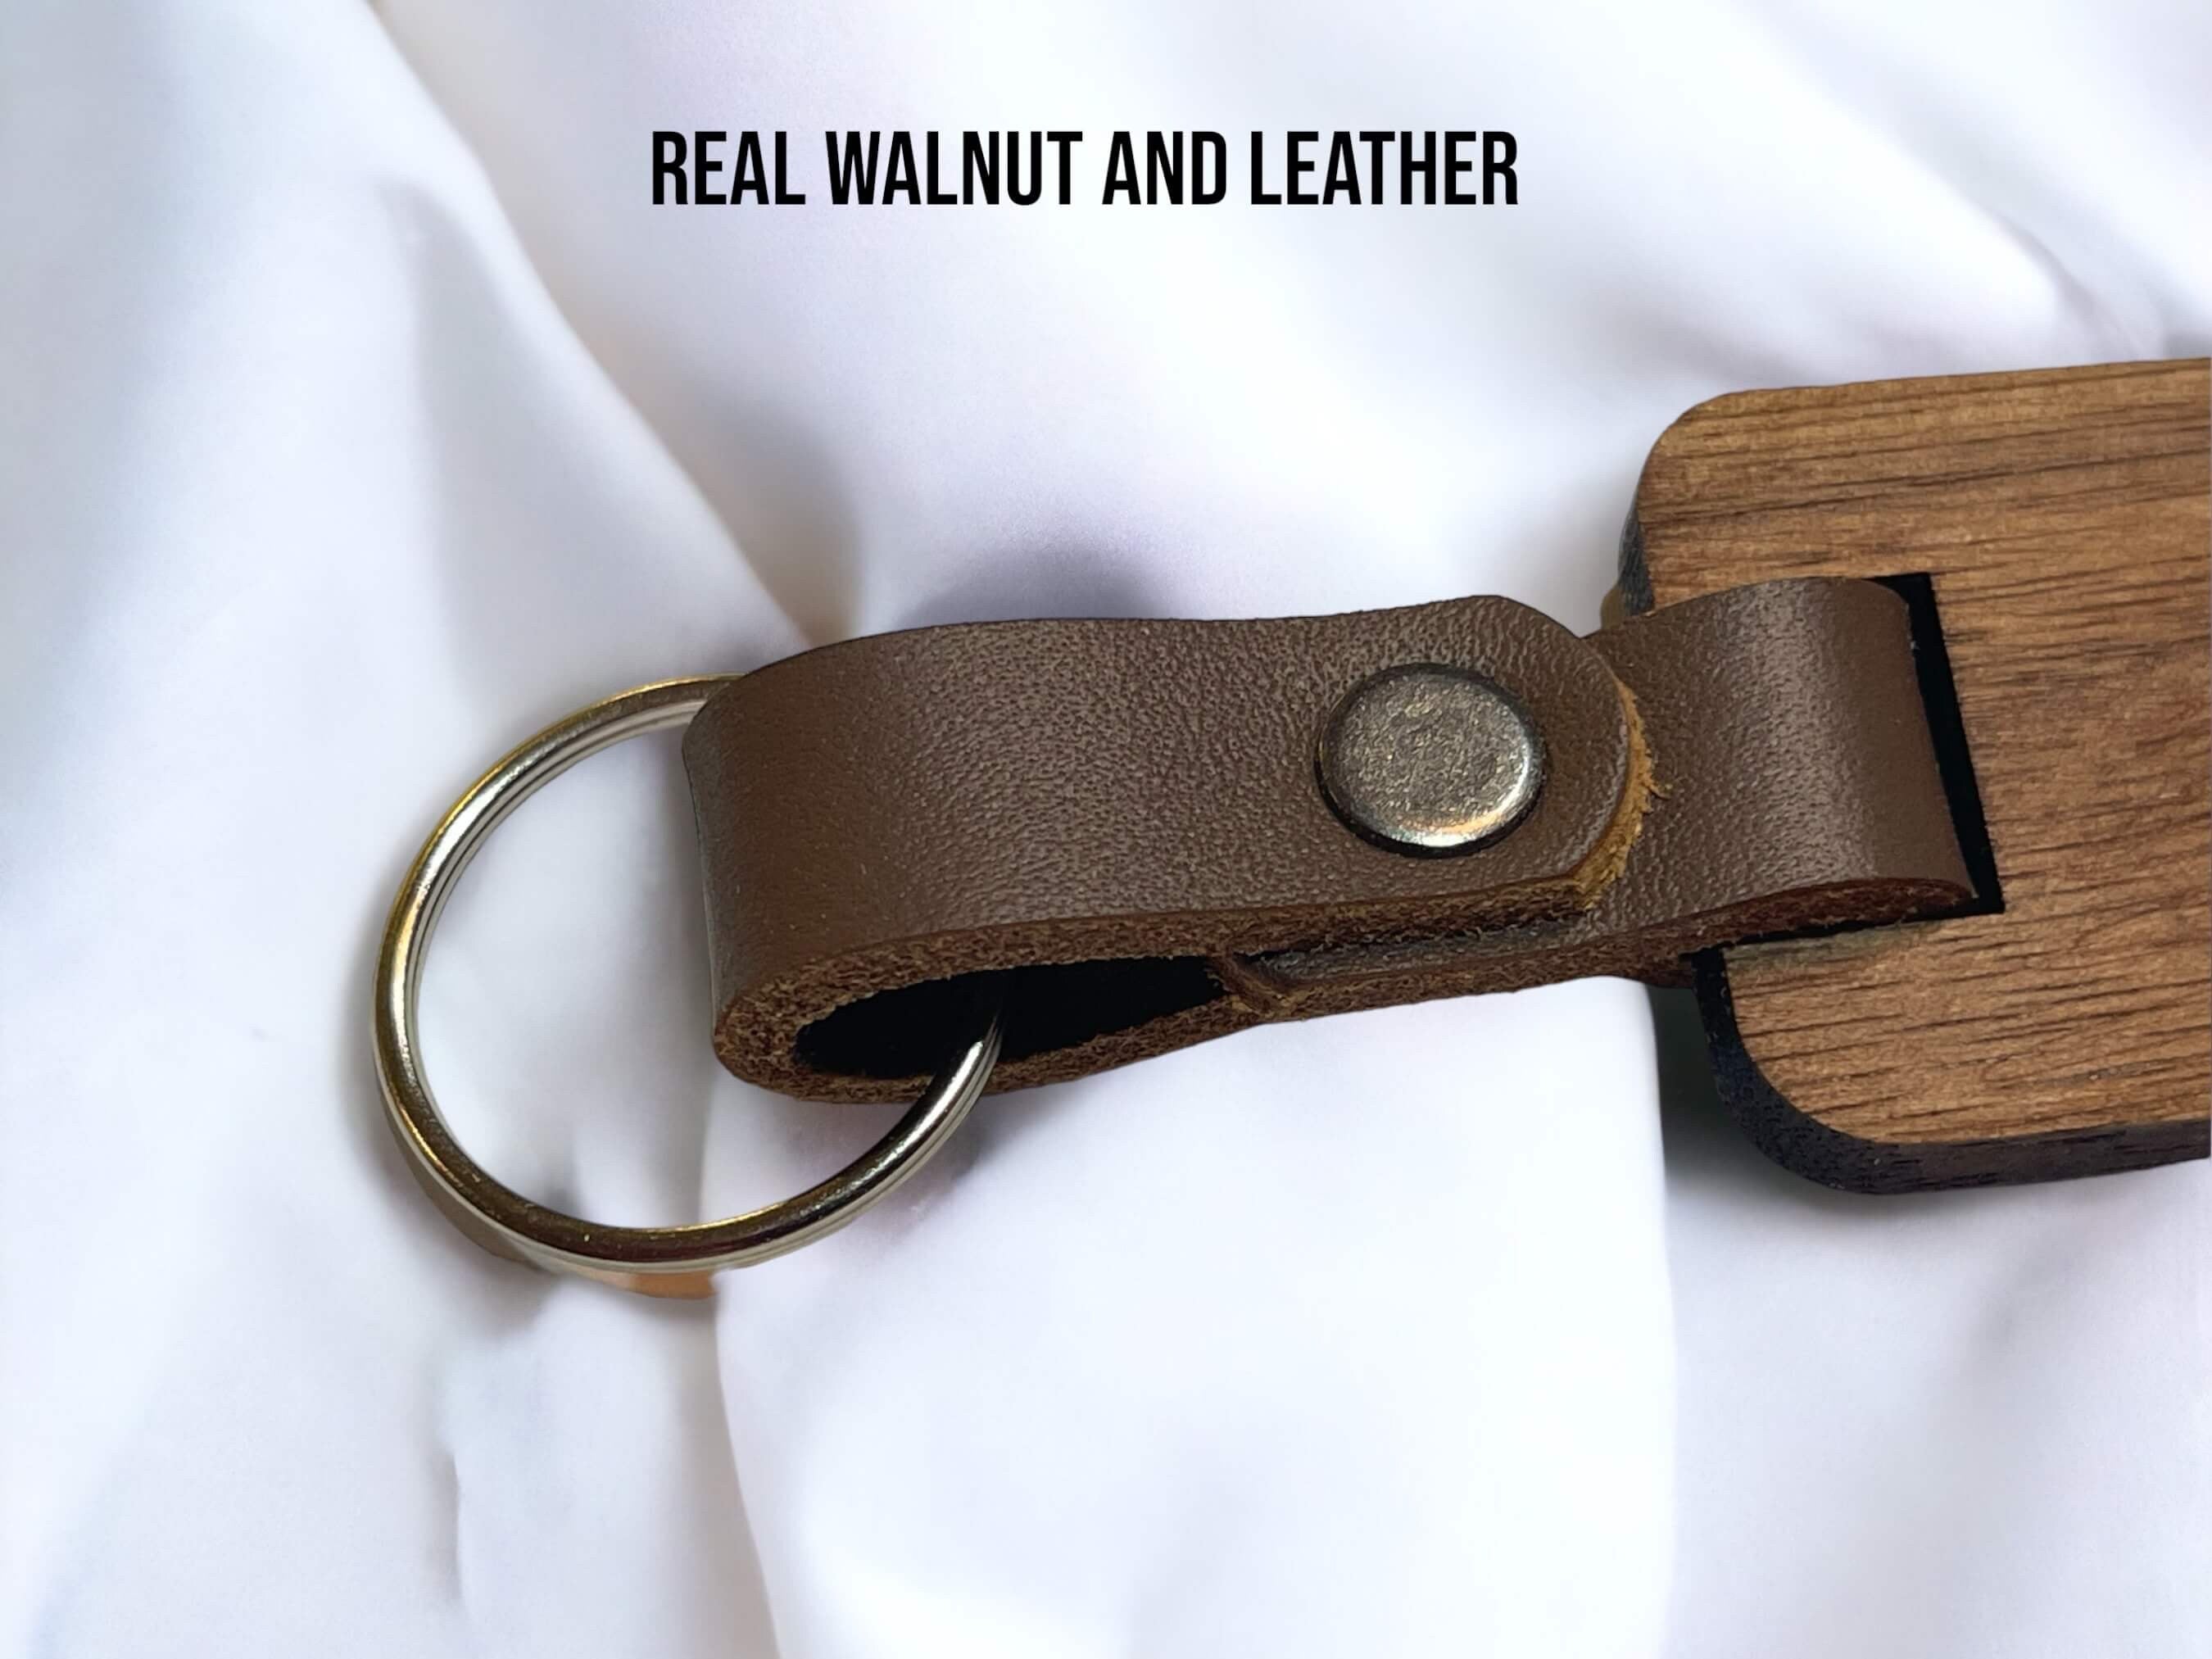 This is an up-close photo showing the real natural leather strap that we hand cut to make our walnut keyrings. 